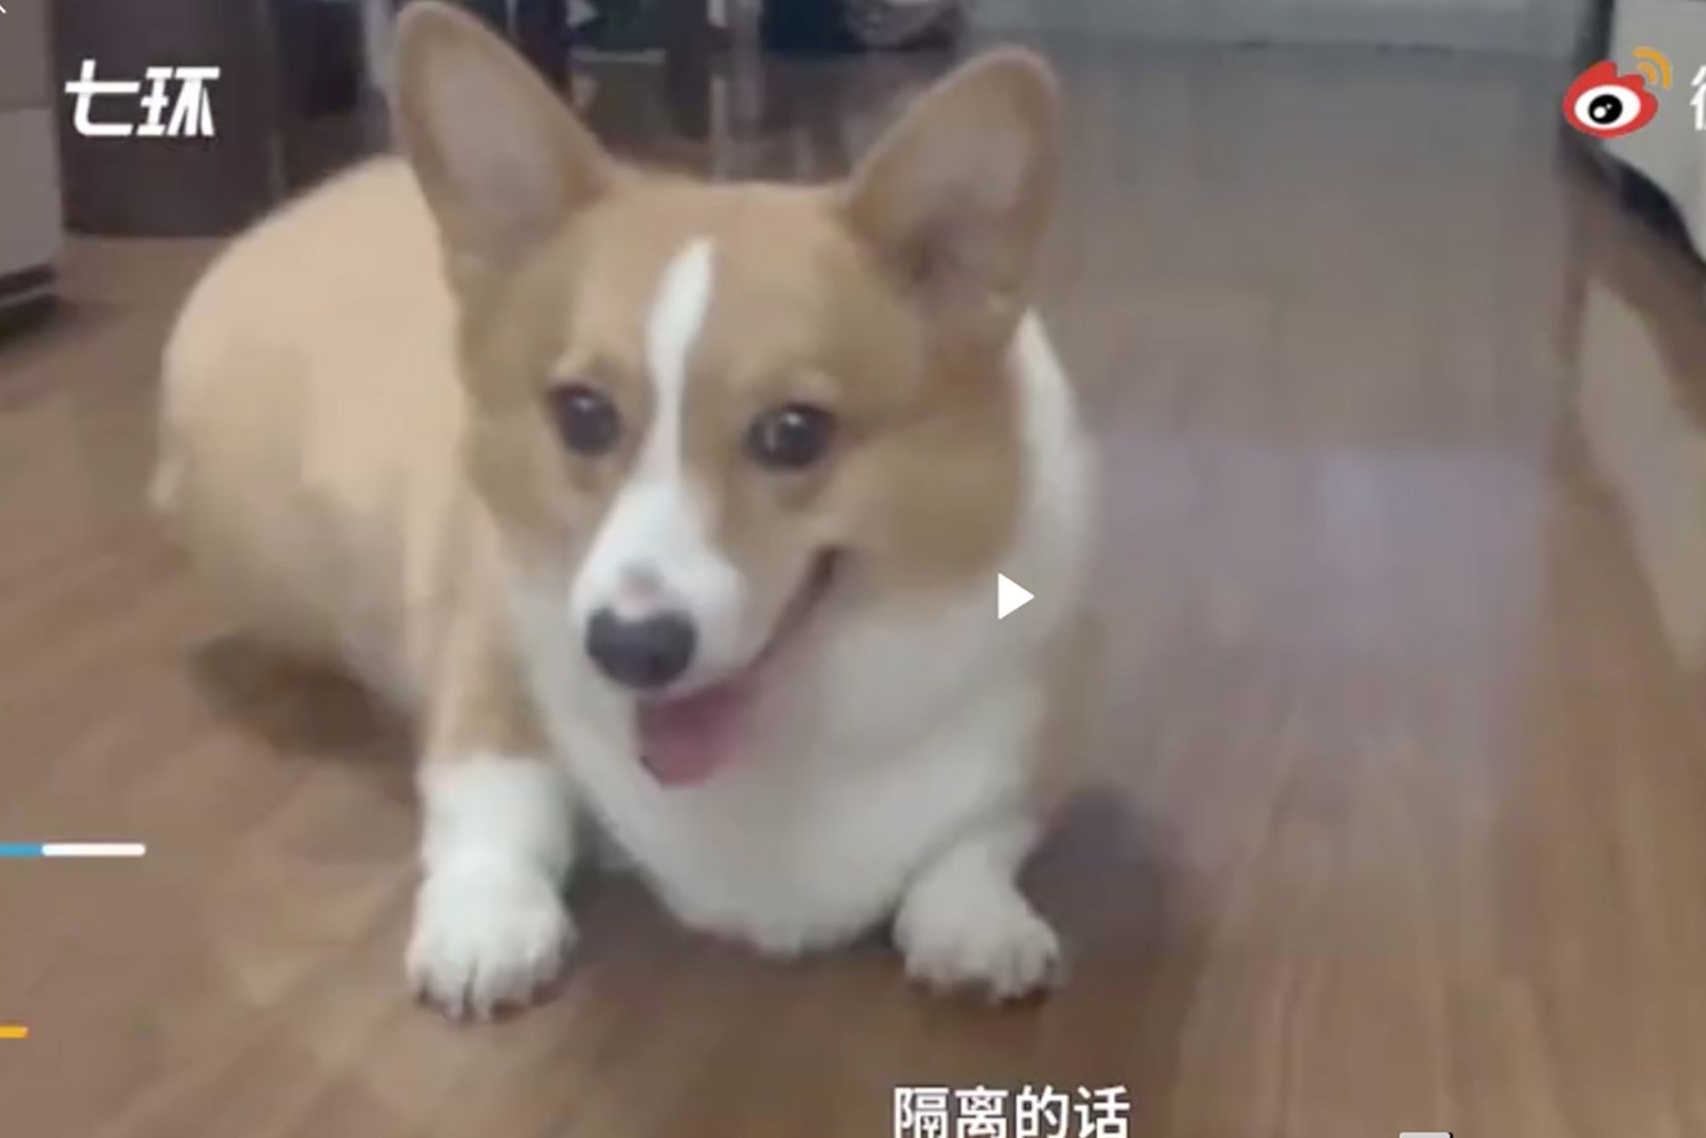 China Left In Shock Following Brutal Killing Of Corgi During Covid-19 Disinfection